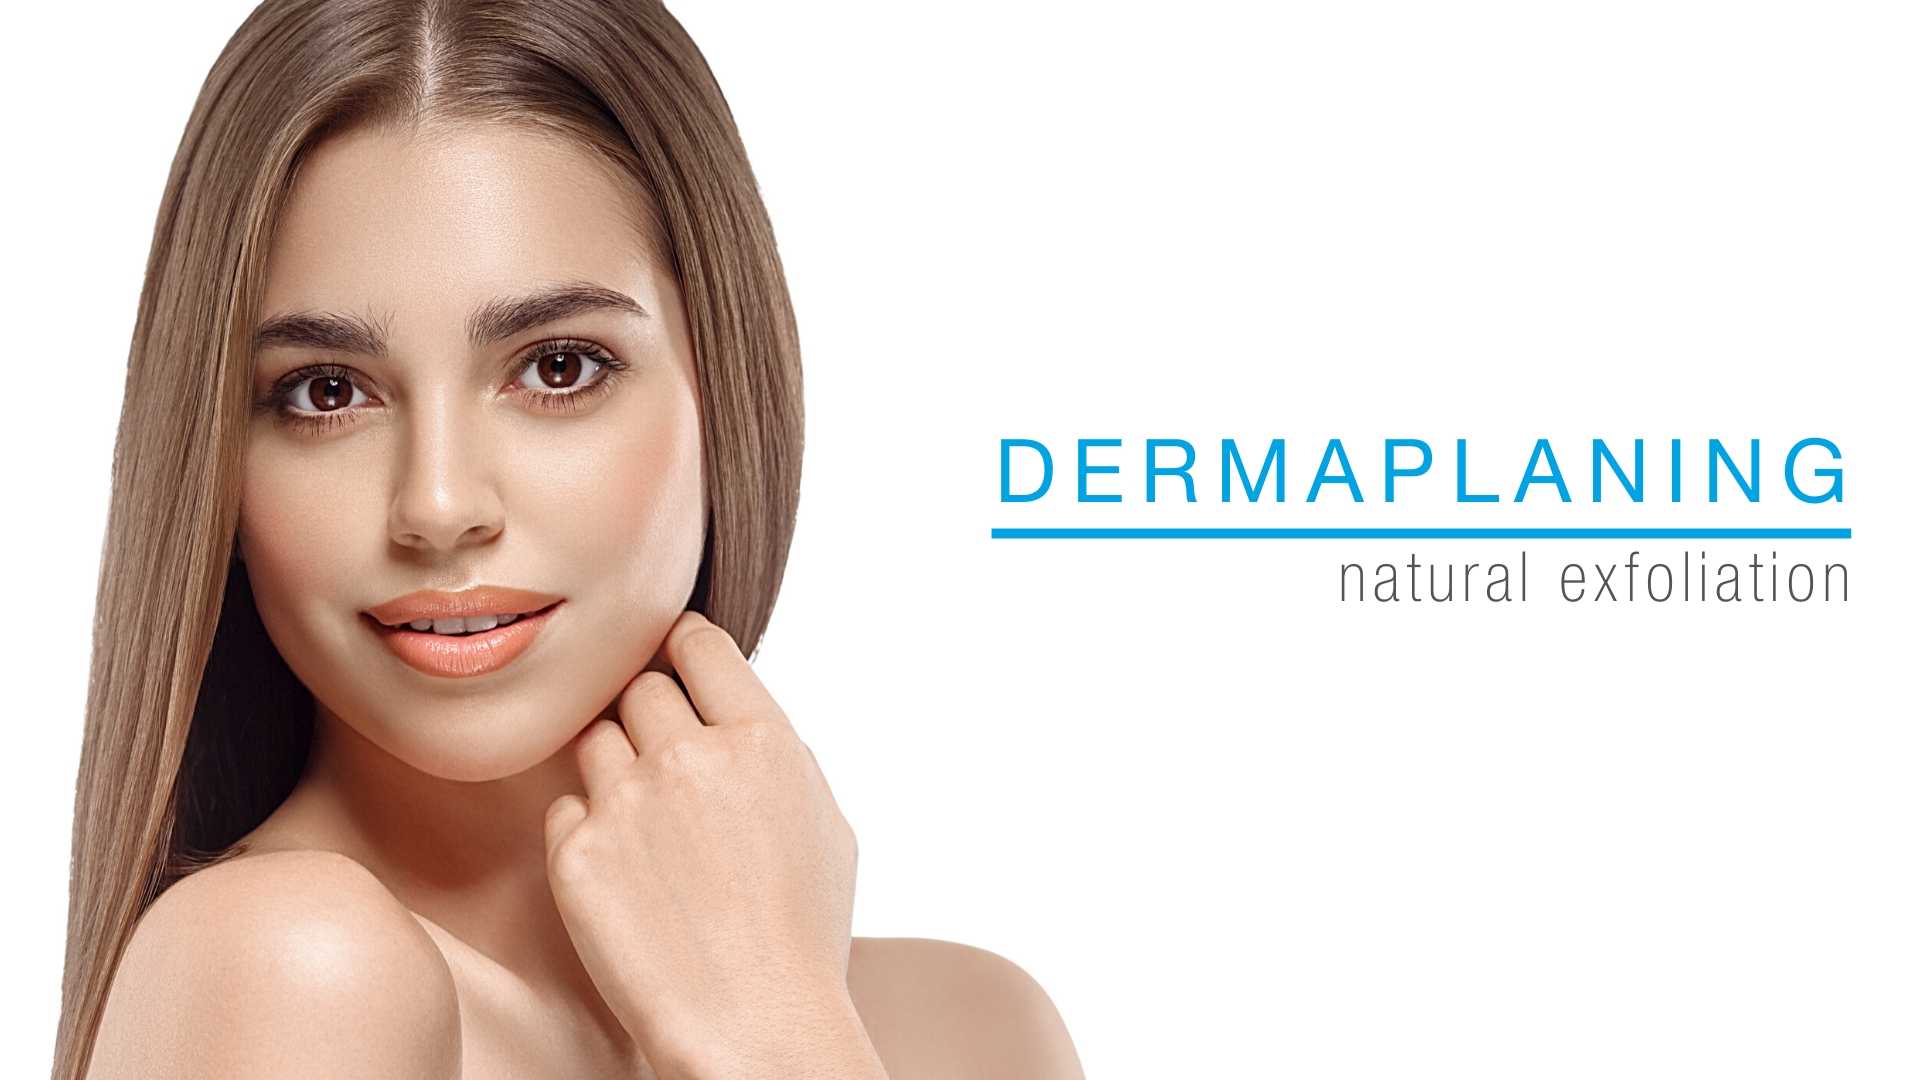 Beautiful woman looks happily at viewer showing her Dermaplaning results.